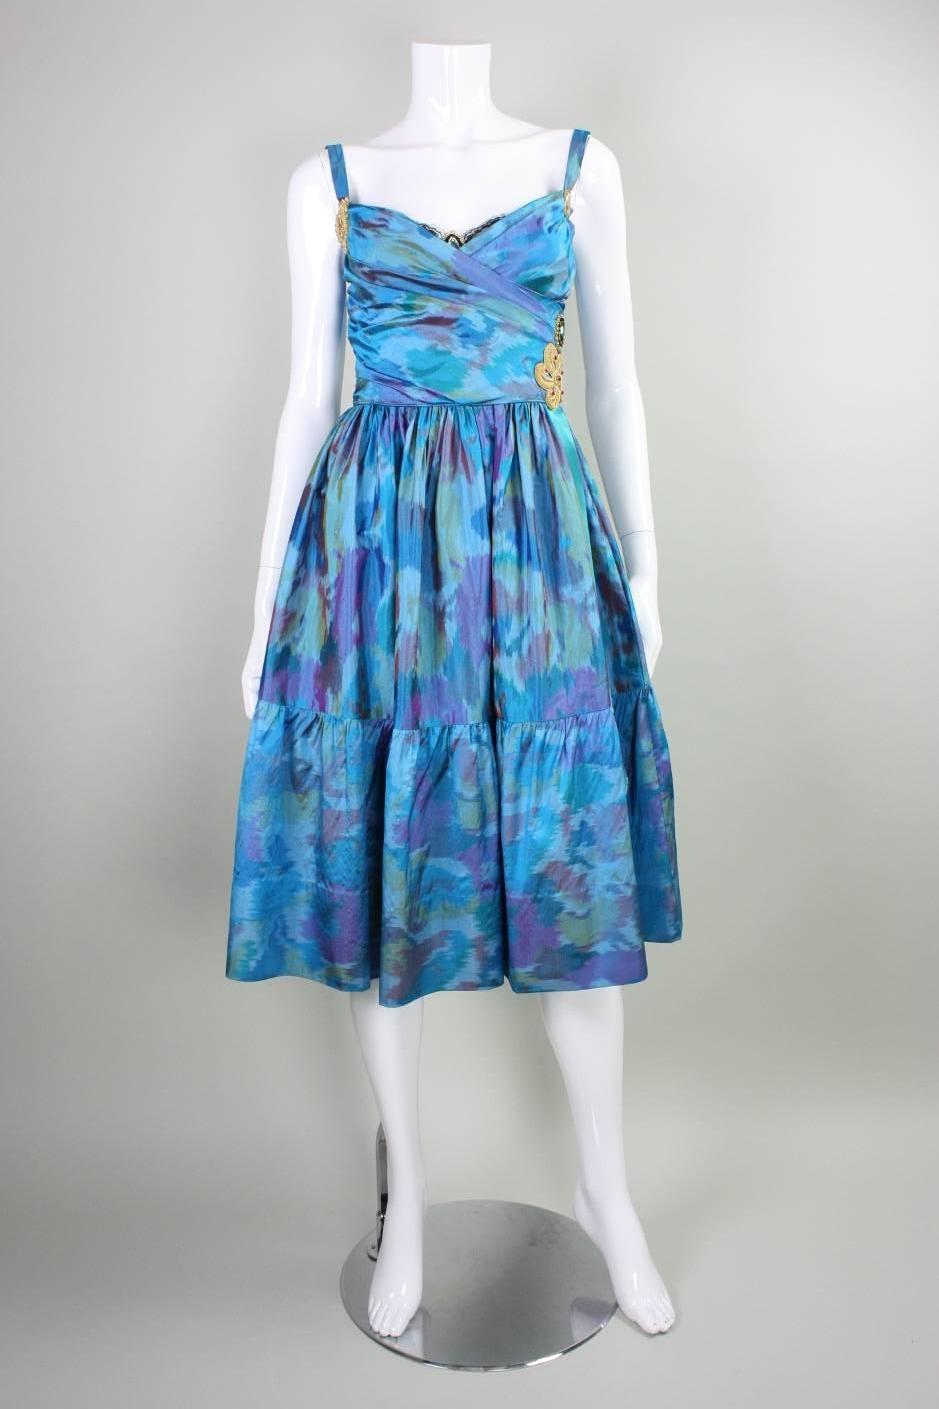 Vintage dress from Tracy Feith dates to the 1990's and is made of silk with an ikat weave in tones of blue, green, and purple.  Fitted bodice has ruched crisscross neckline with a black lace insert at center front.  Flared skirt is gathered all